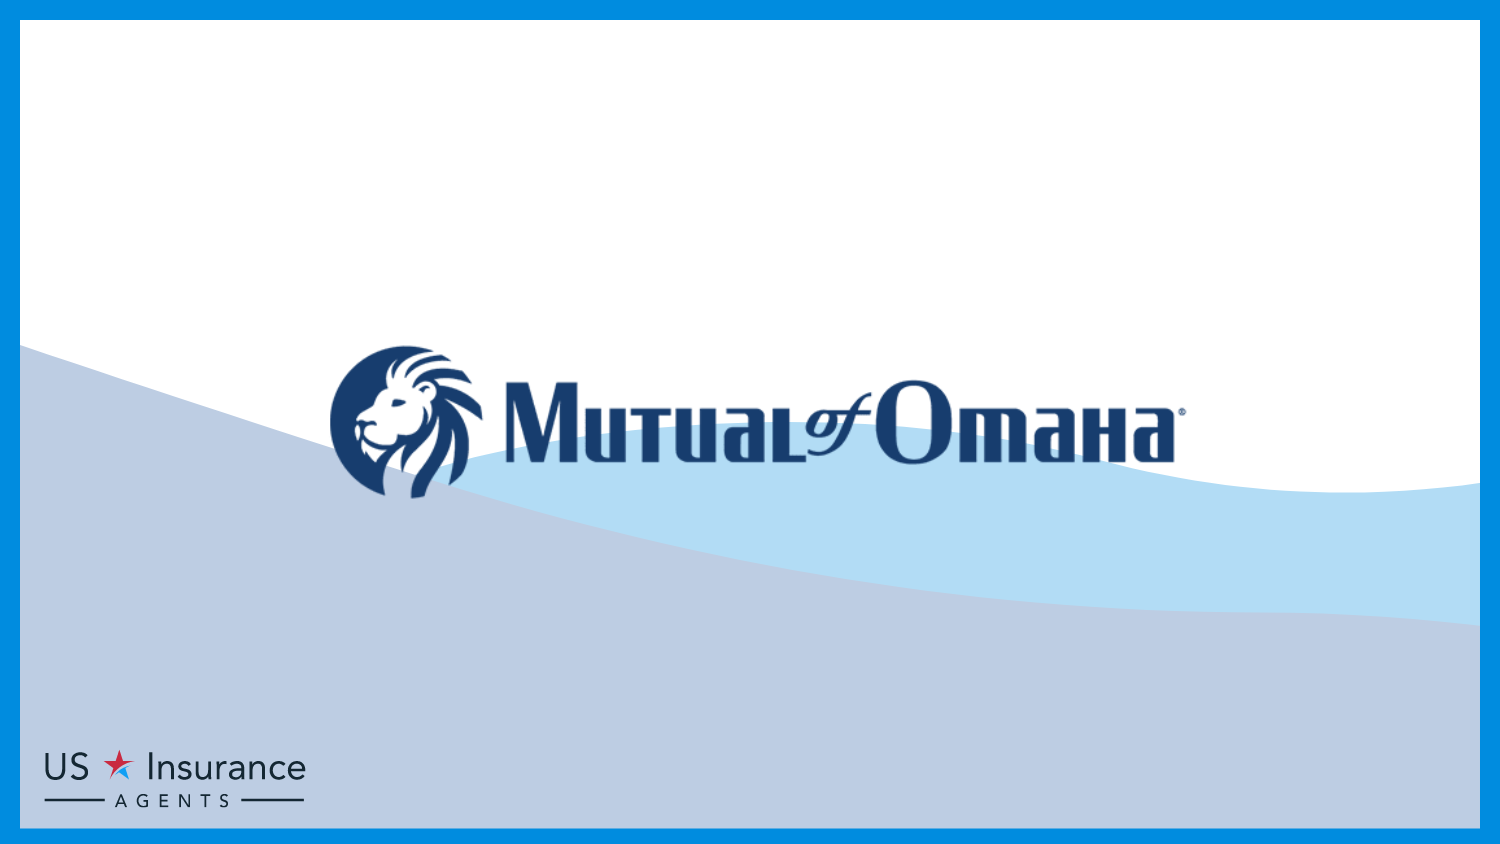 Mutual of Omaha: Best Life Insurance for SSI Recipients